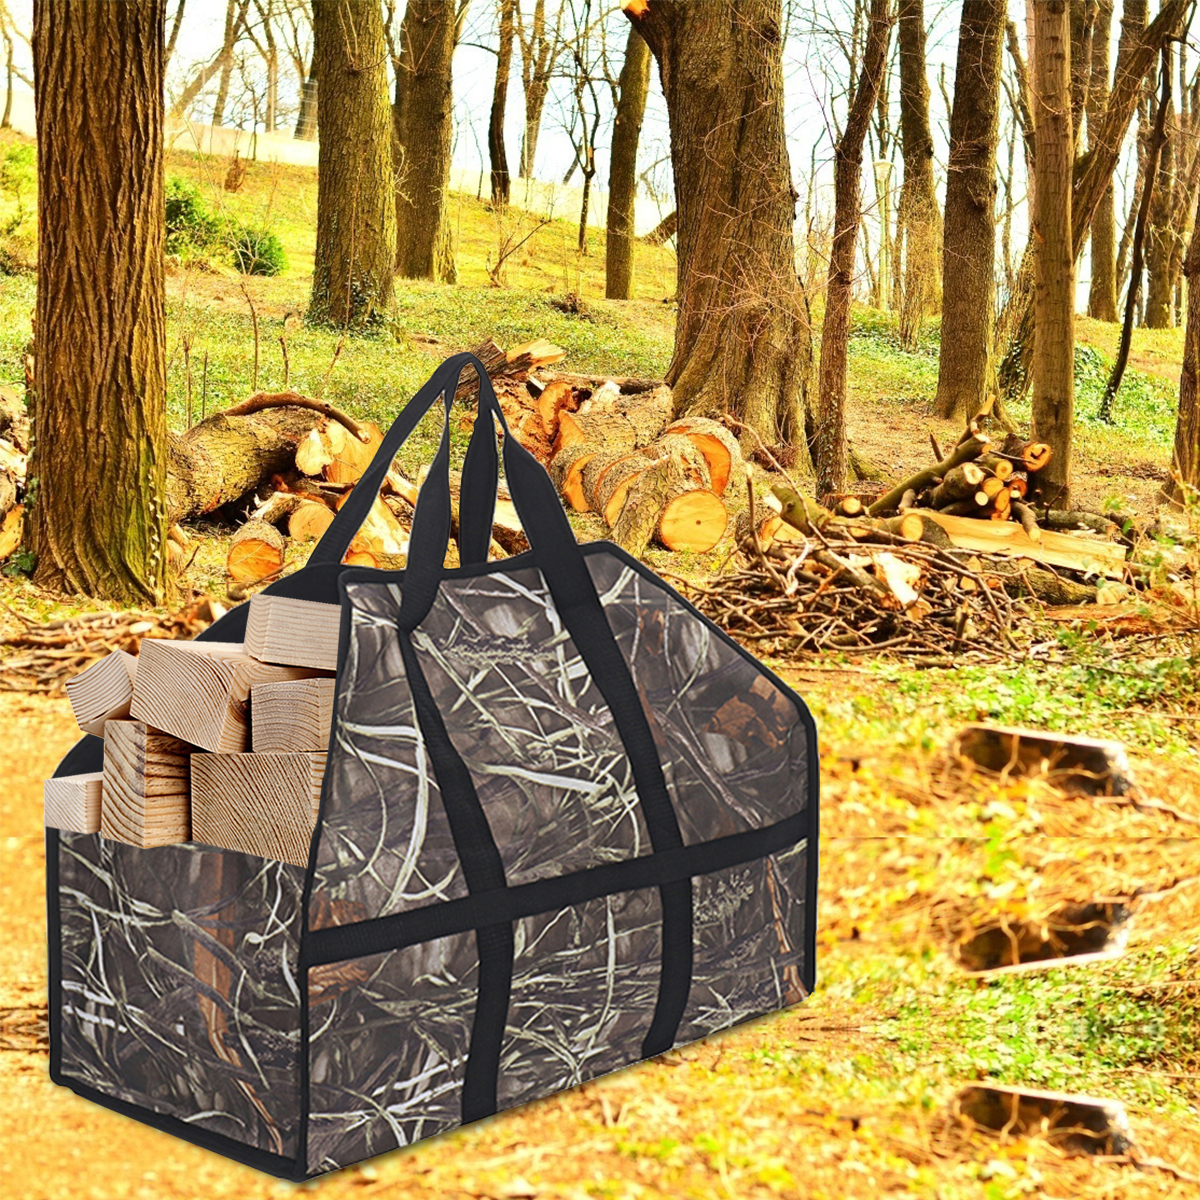 210D-Oxford-Cloth-Firewood-Carrier-Bag-Wood-Holder-Storage-Bag-Tote-Organizer-Outdoor-Camping-Picnic-1764243-10